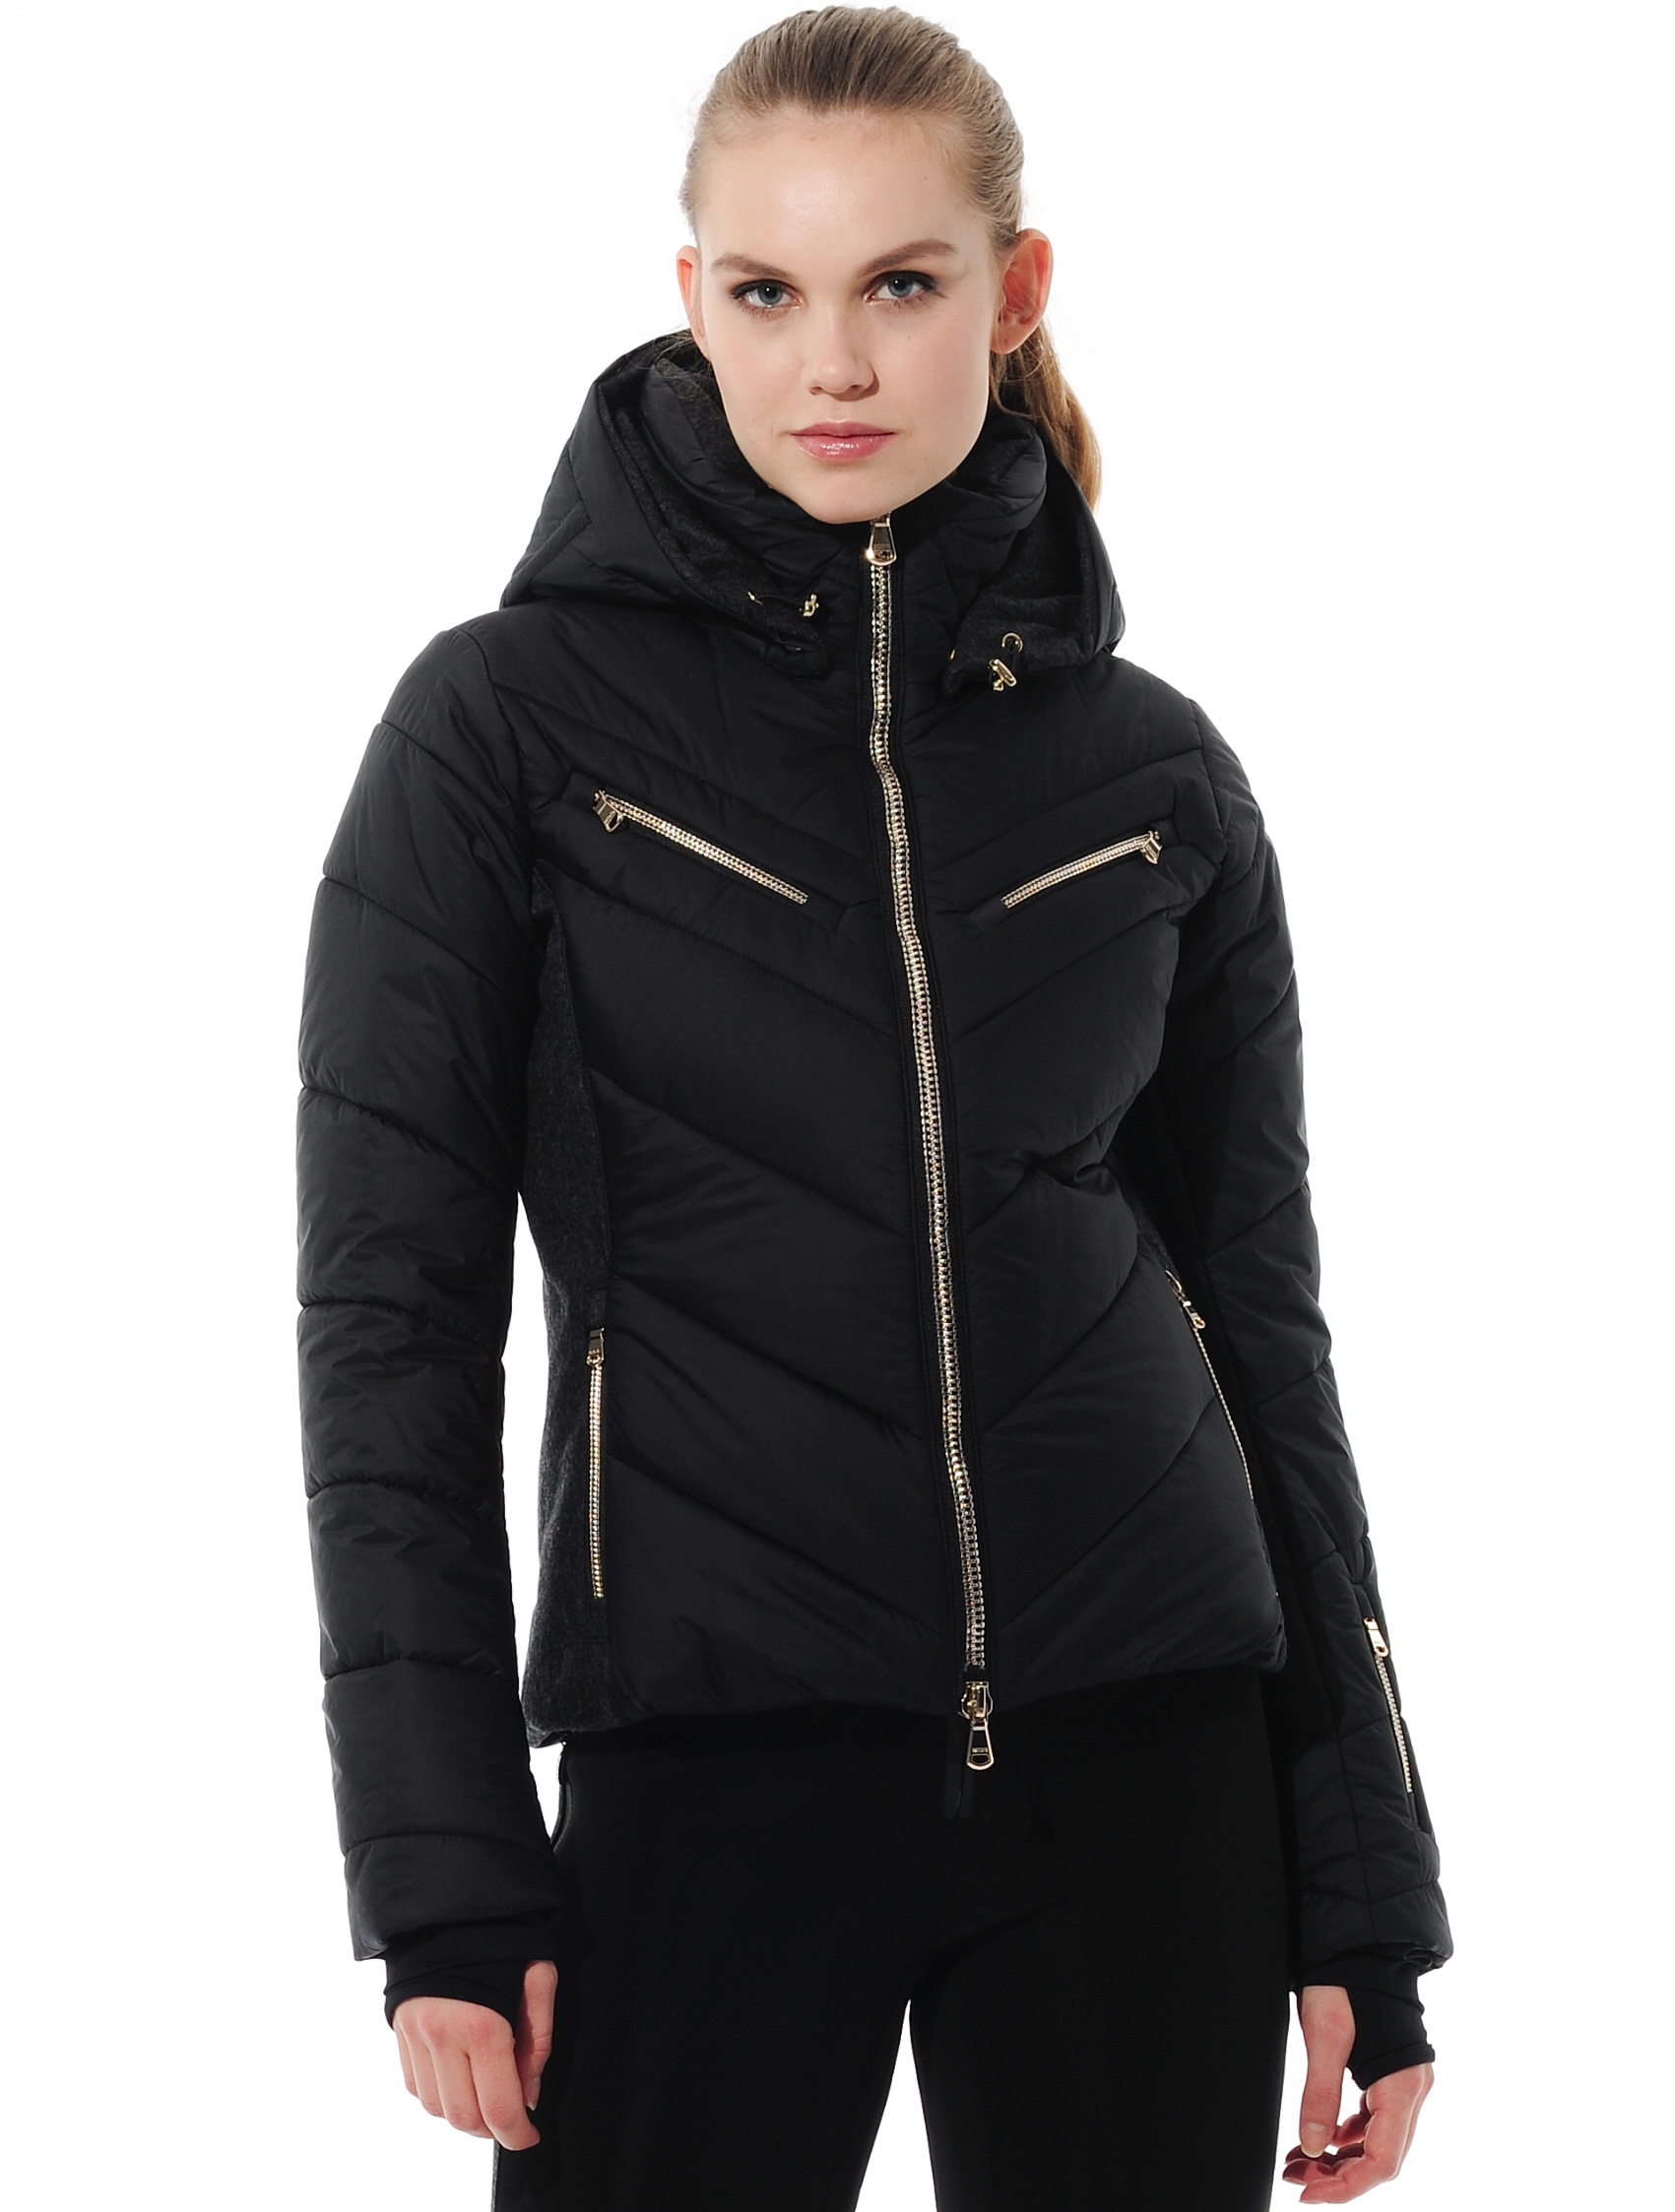 stretch ski jacket with loden insets black 